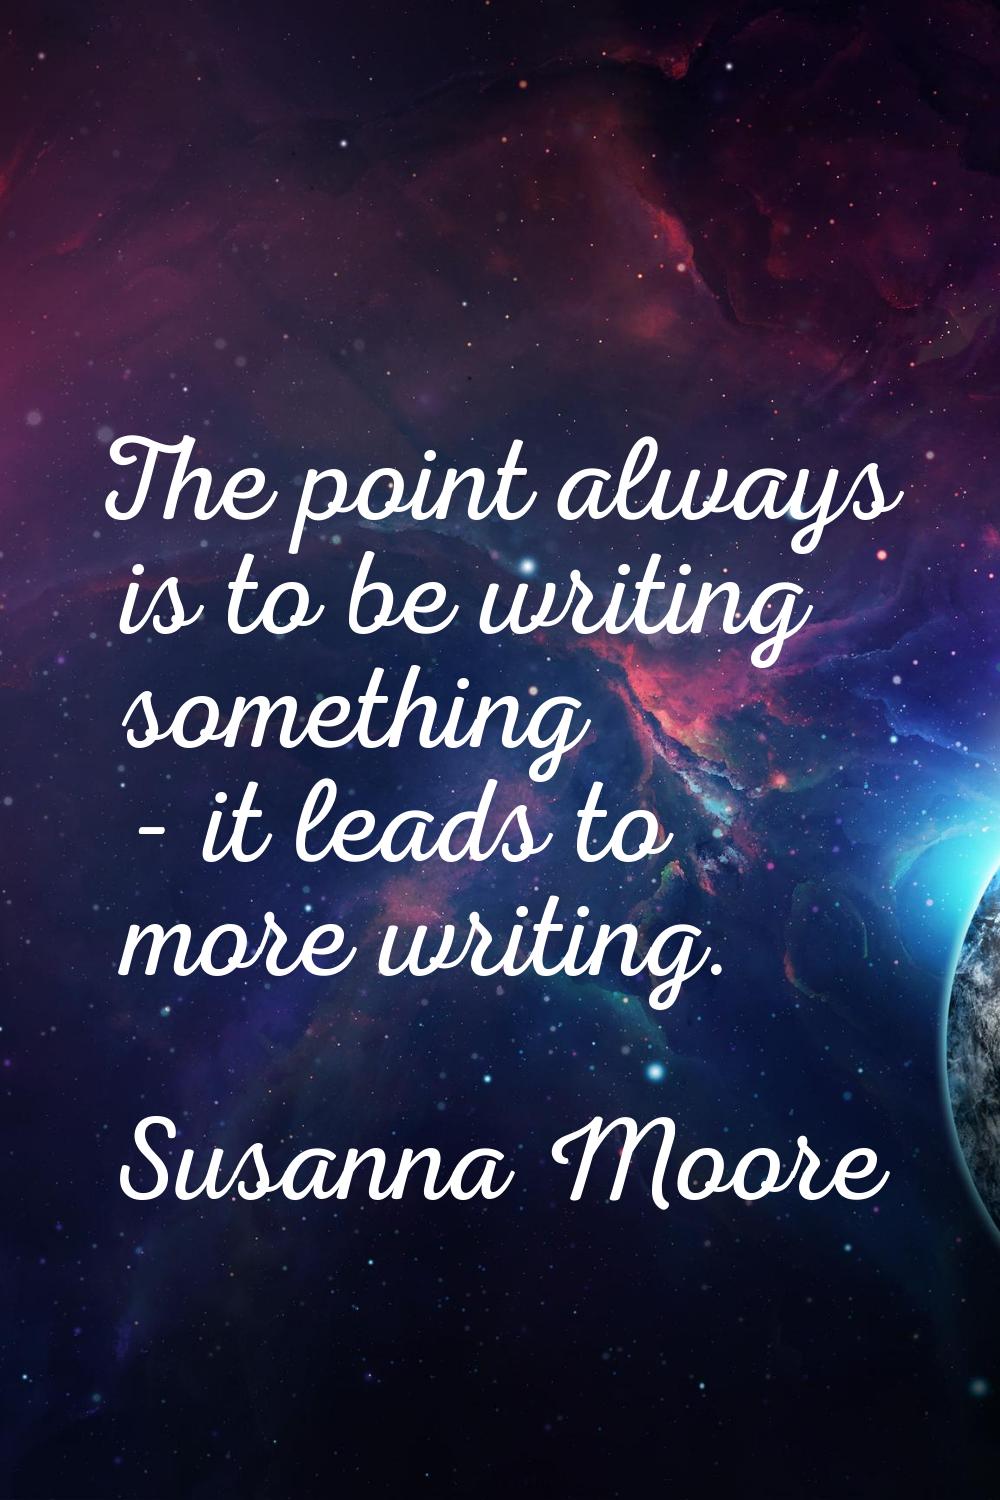 The point always is to be writing something - it leads to more writing.